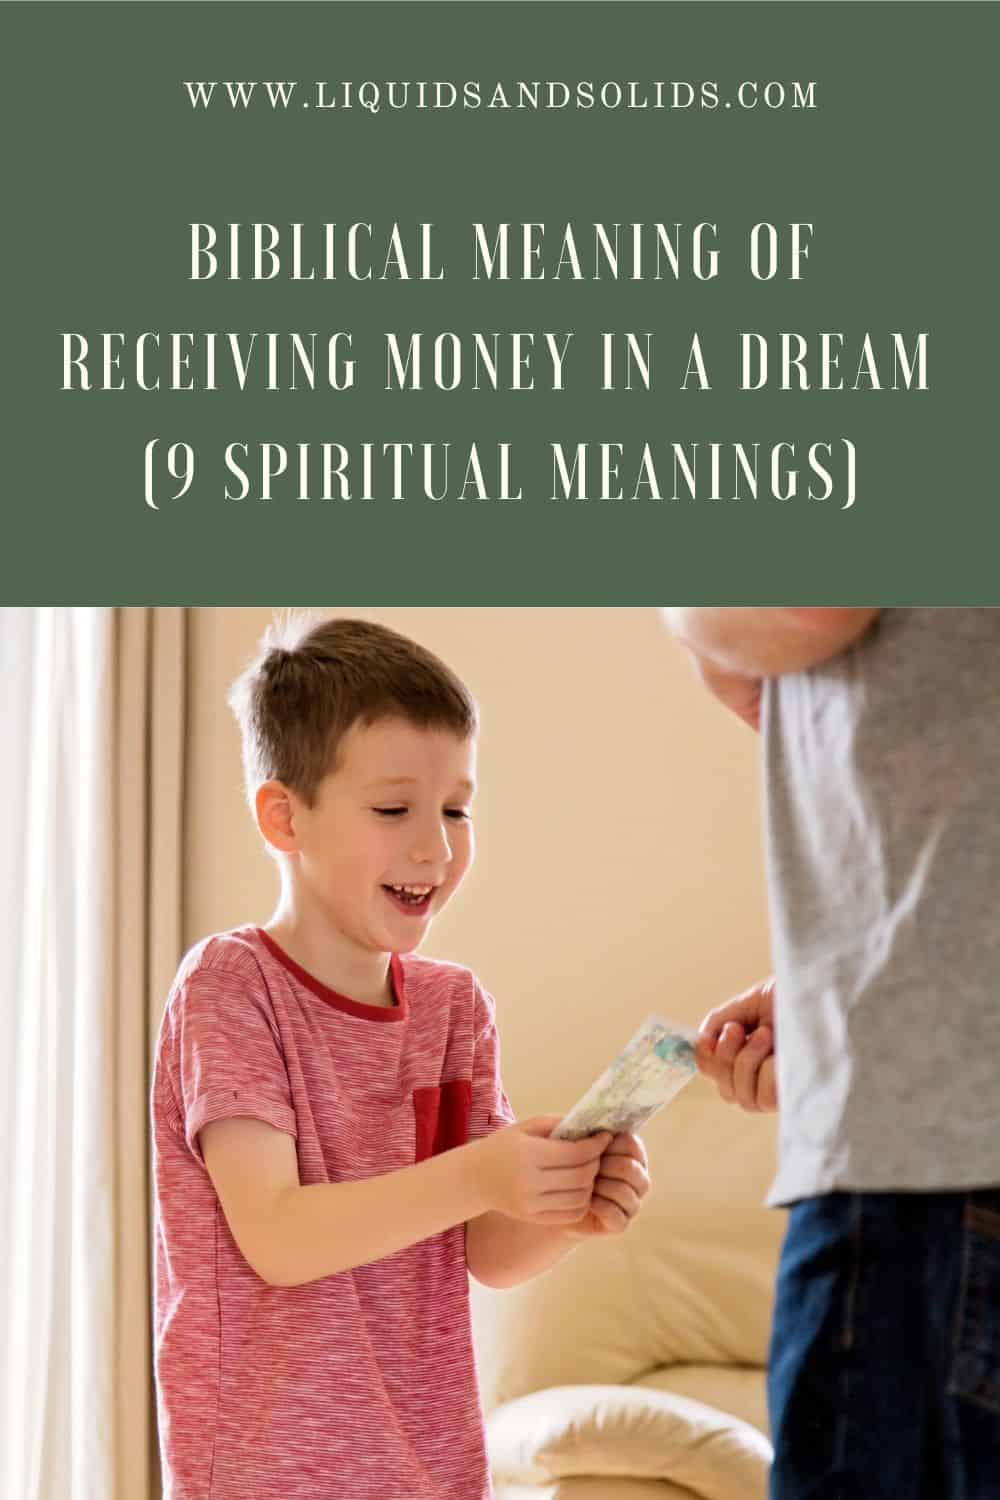 Biblical Meaning Of Receiving Money In A Dream (9 Spiritual Meanings)